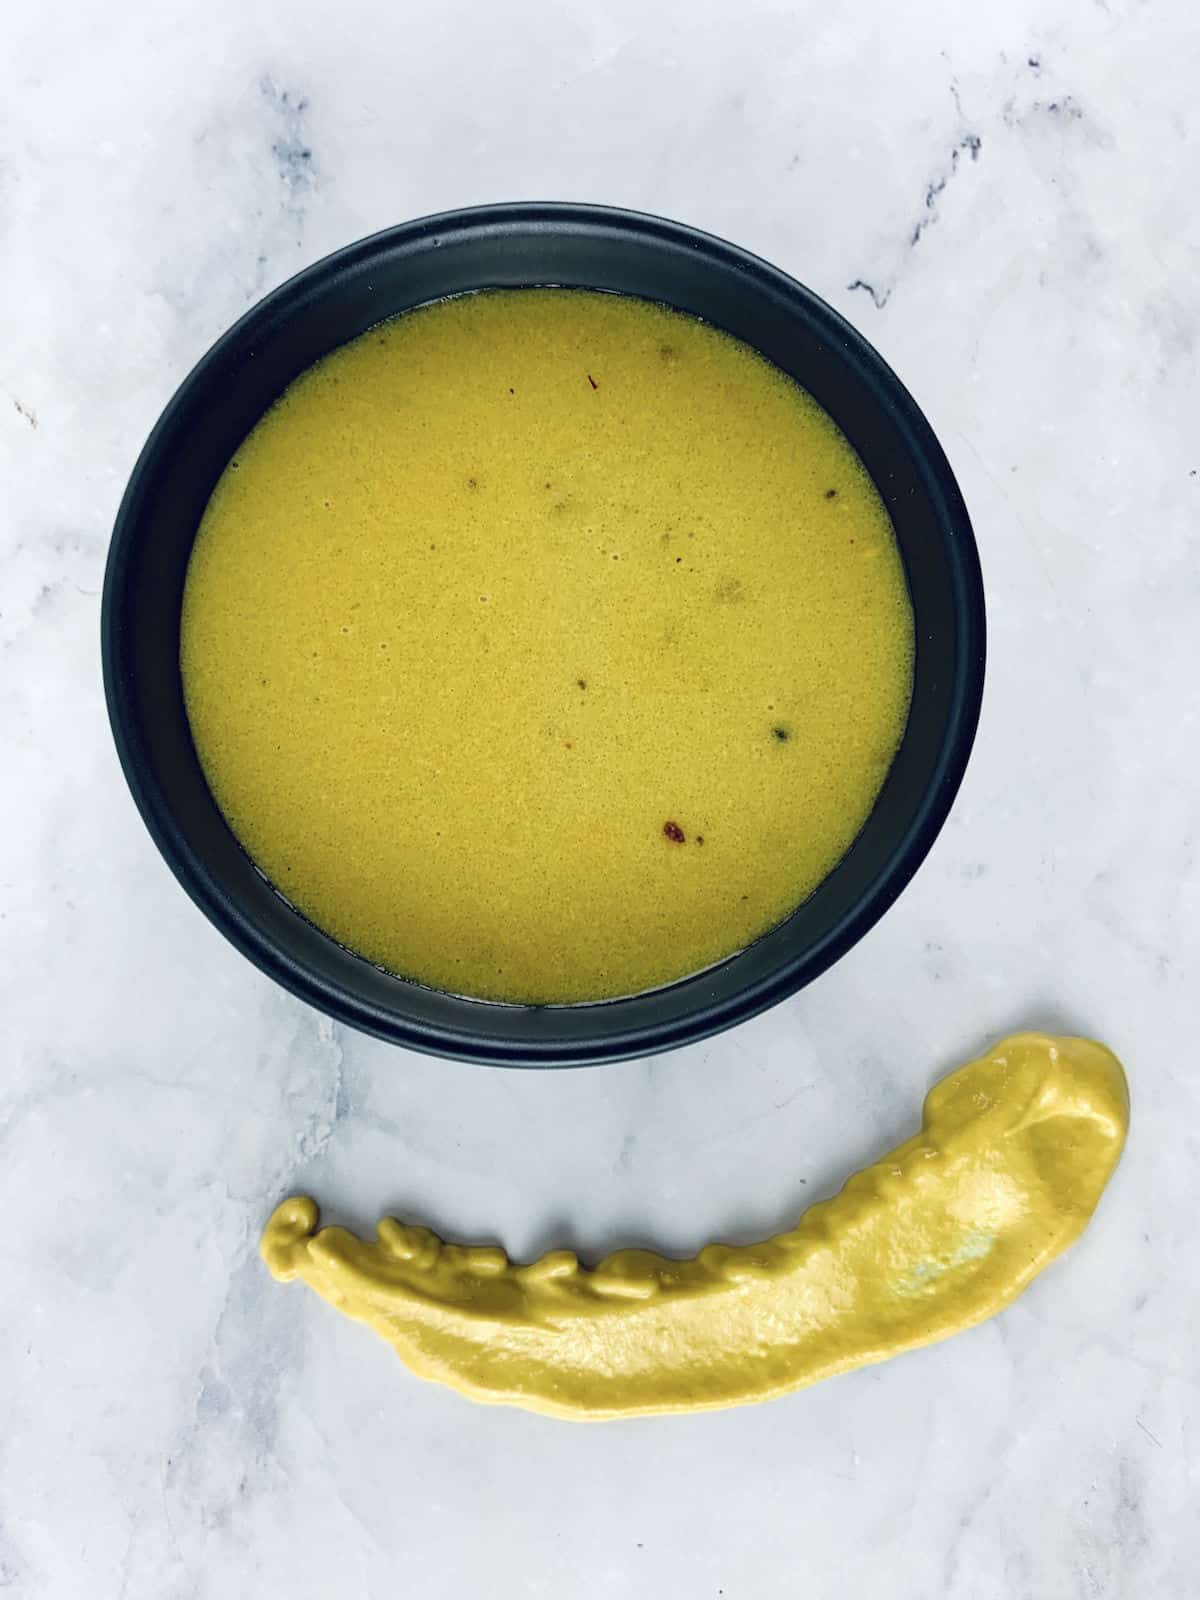 AMERICAN MUSTARD DRESSING IN A BLACK BOWL WITH A YELLOW MUSTARD SMEAR ON THE SIDE